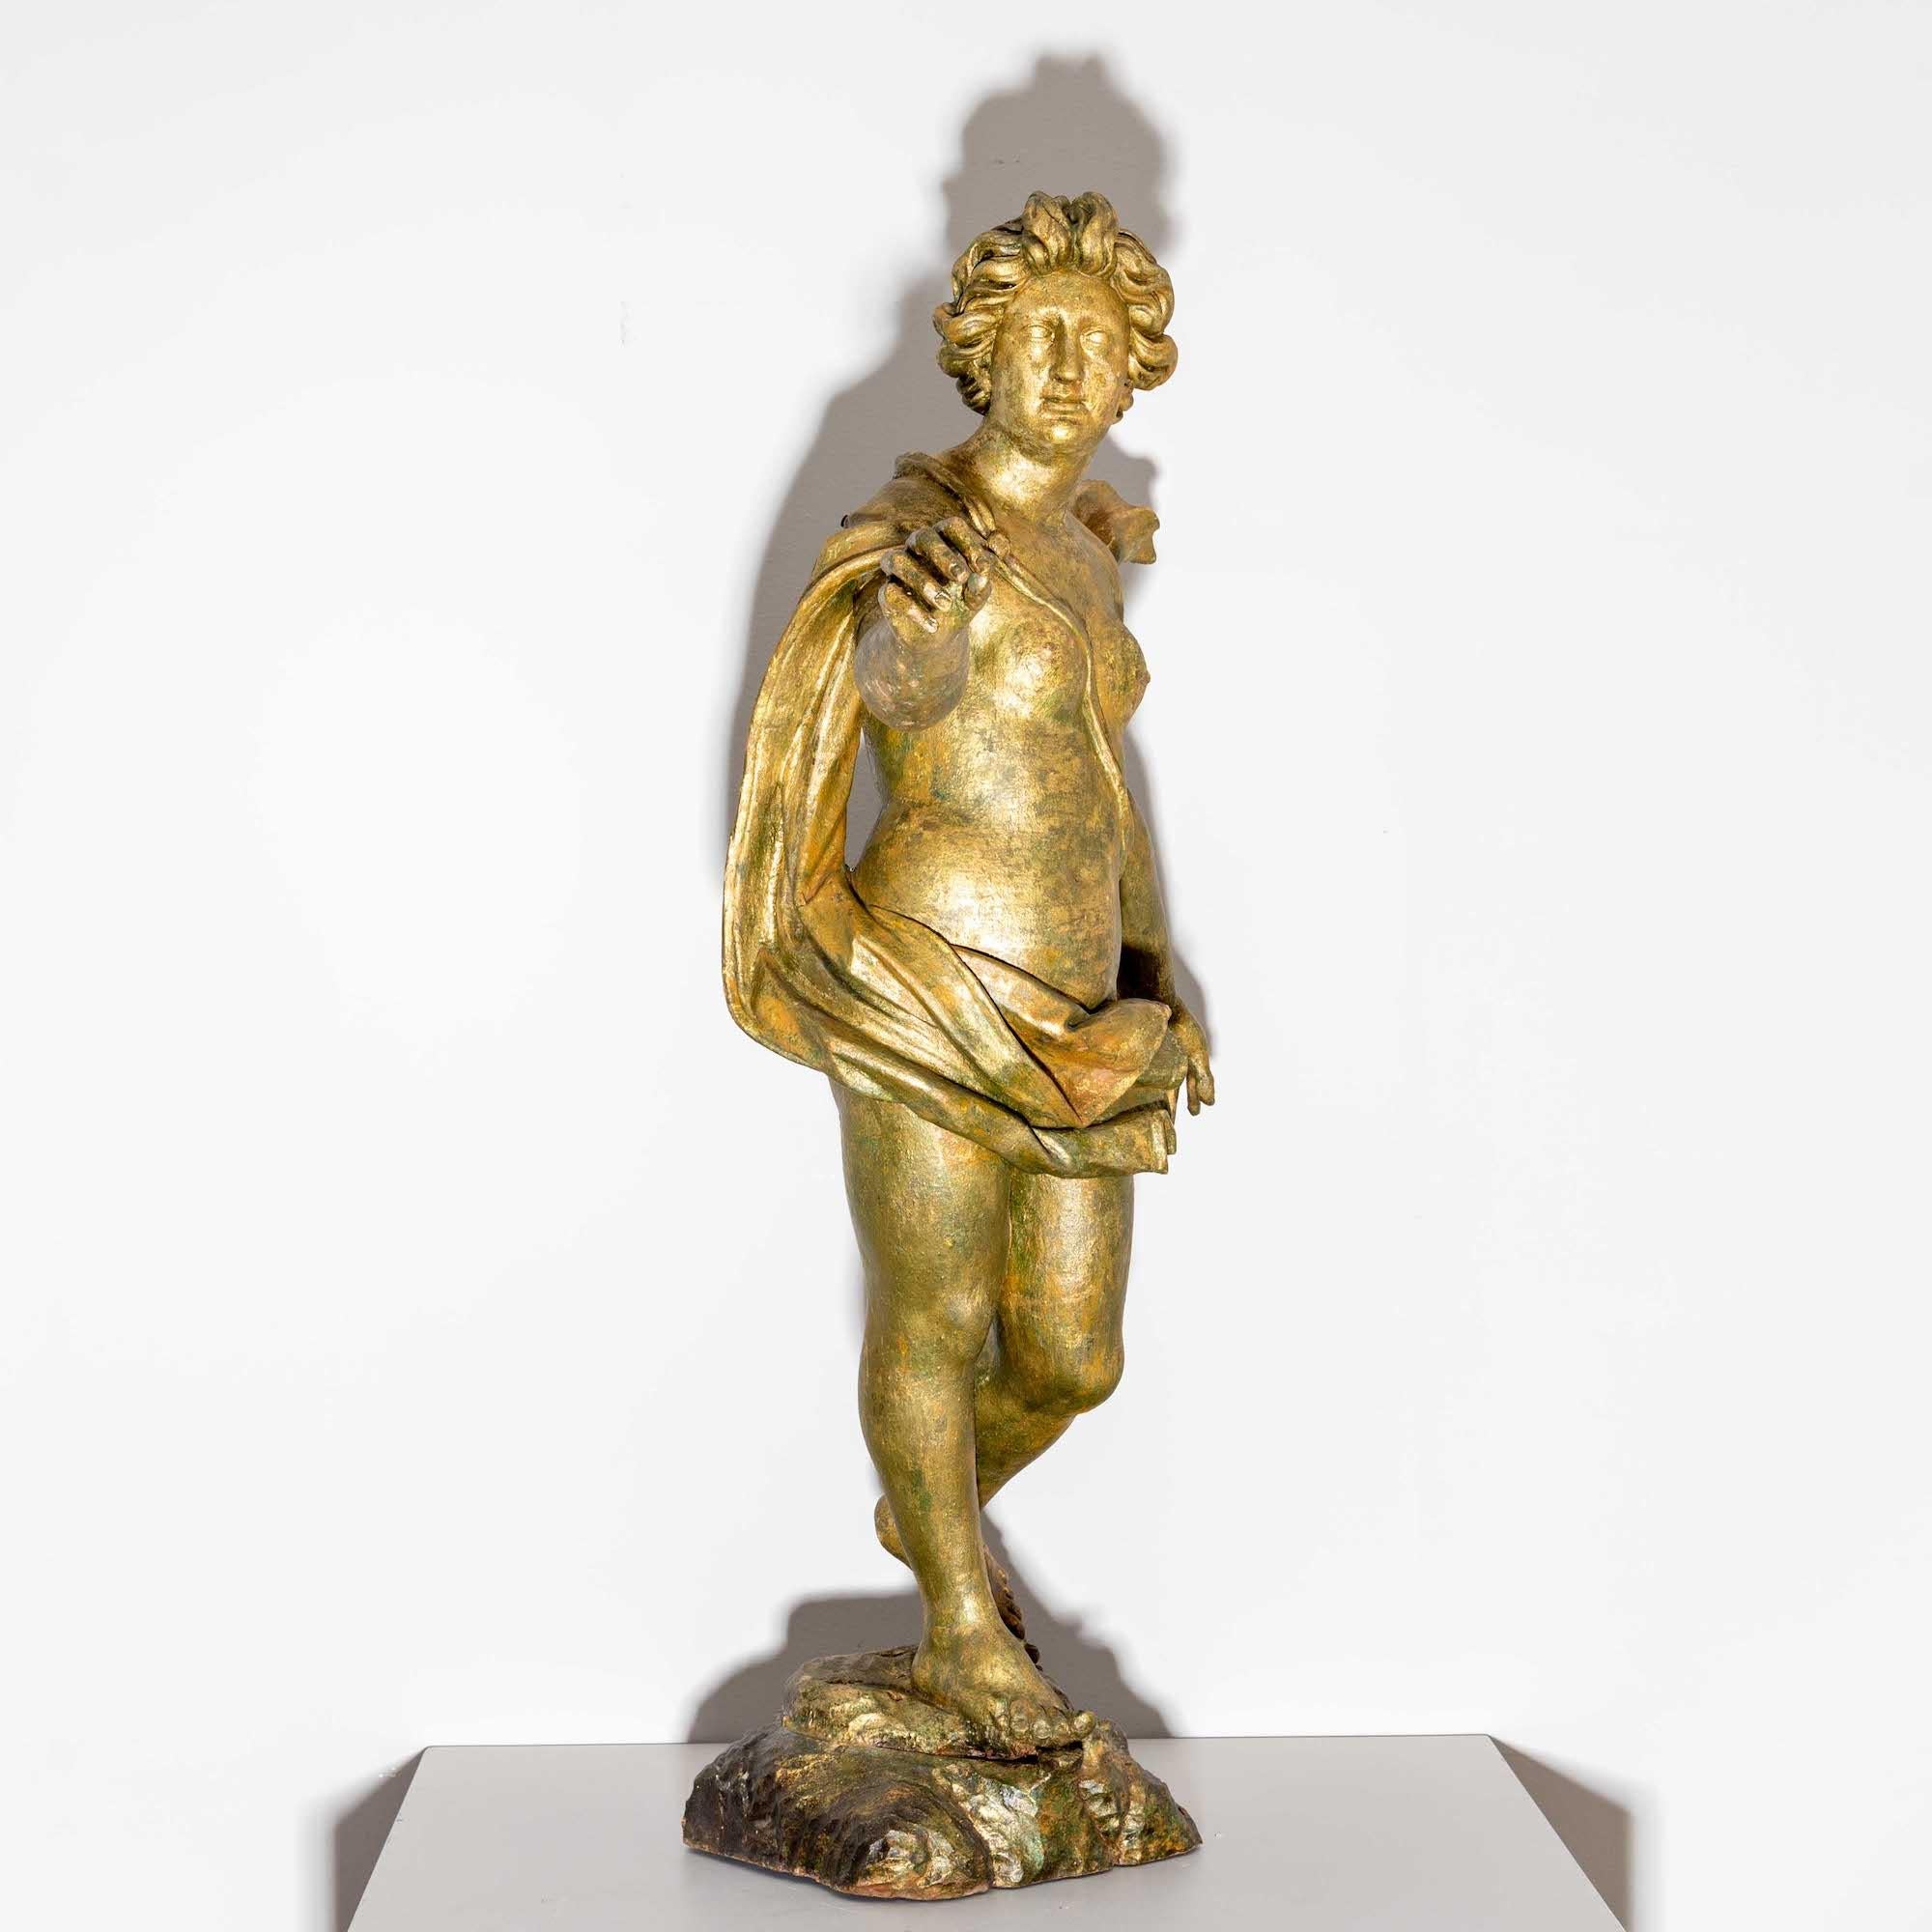 Patinated baroque sculpture on a stylised landscape base in the form of a female figure with a flowing cloak and an expansive gesture. Provenance: Wittelsbach estate.